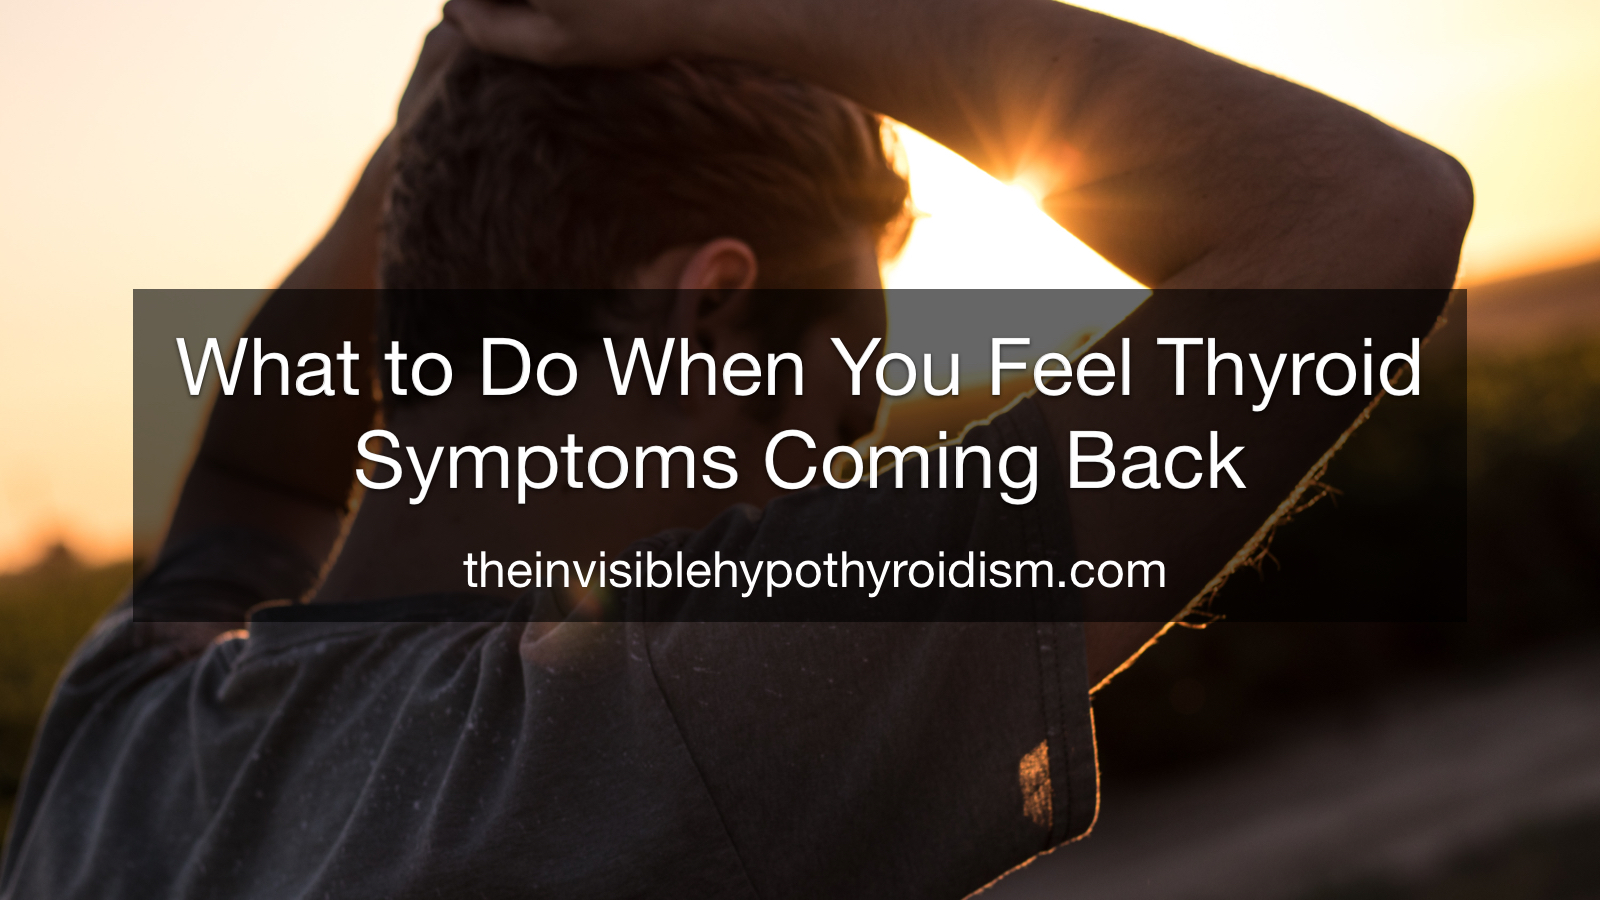 What to Do When You Feel Thyroid Symptoms Coming Back